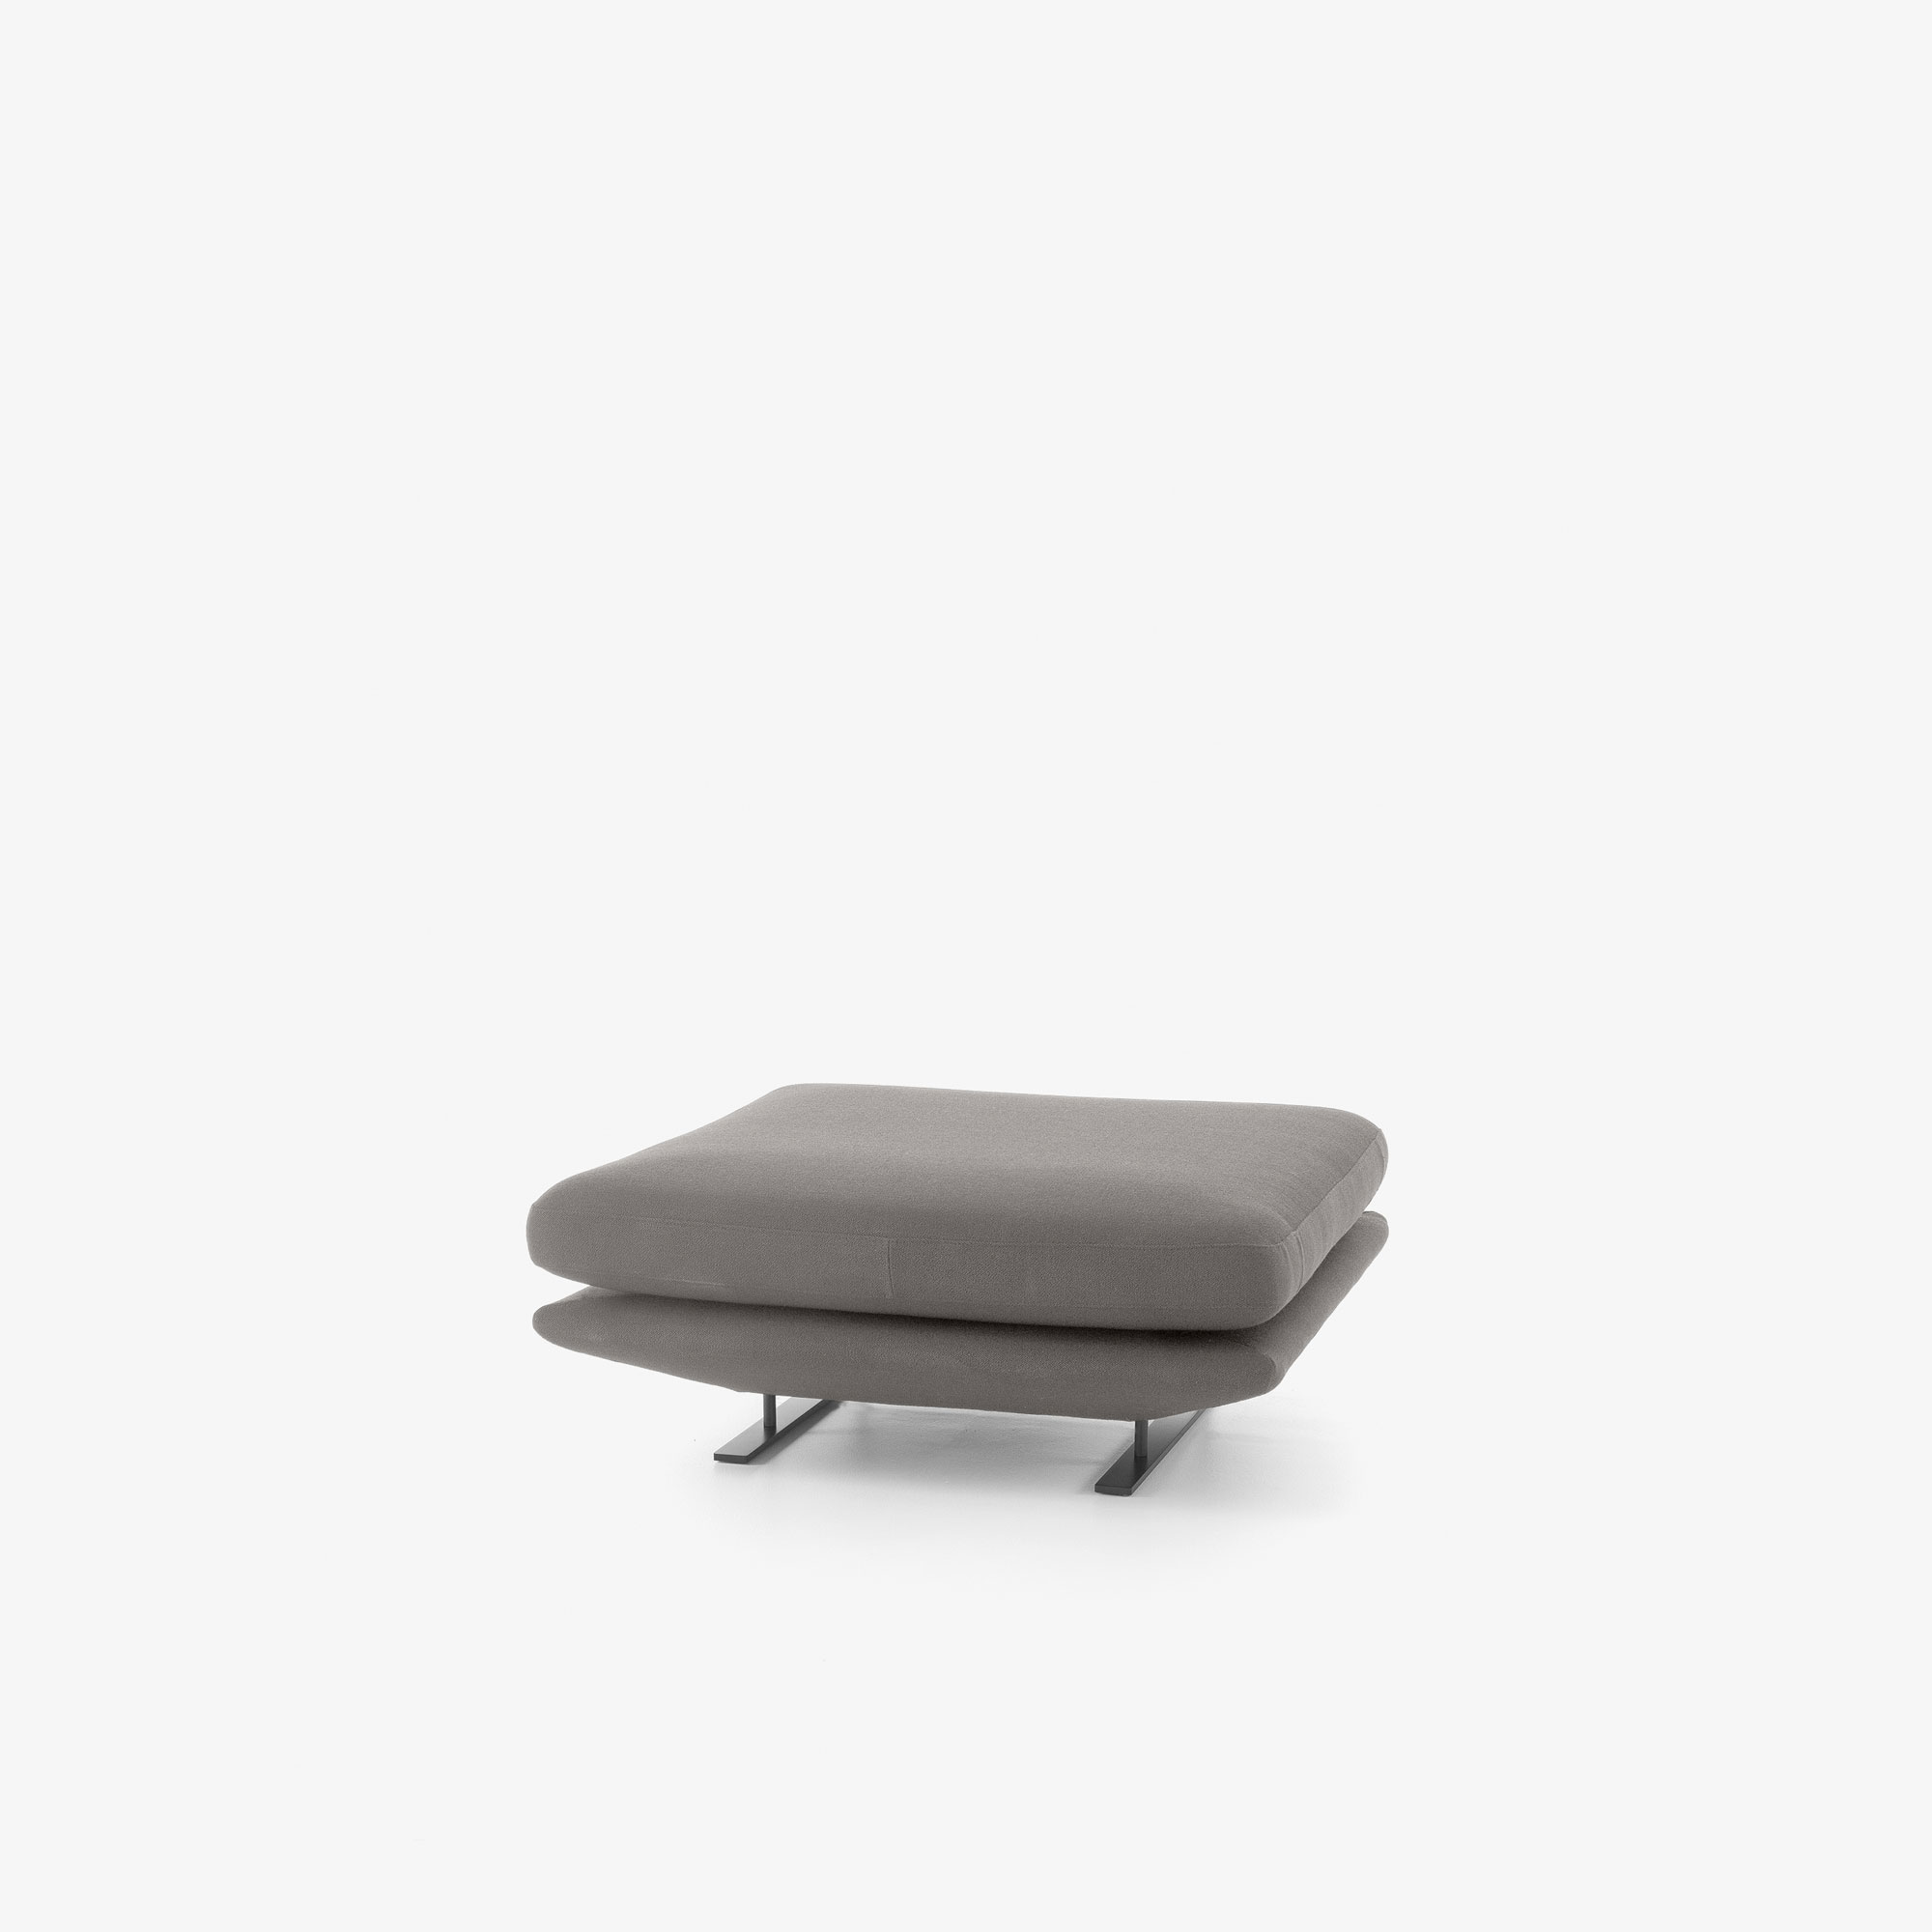 Image Small square footstool depth 100  4